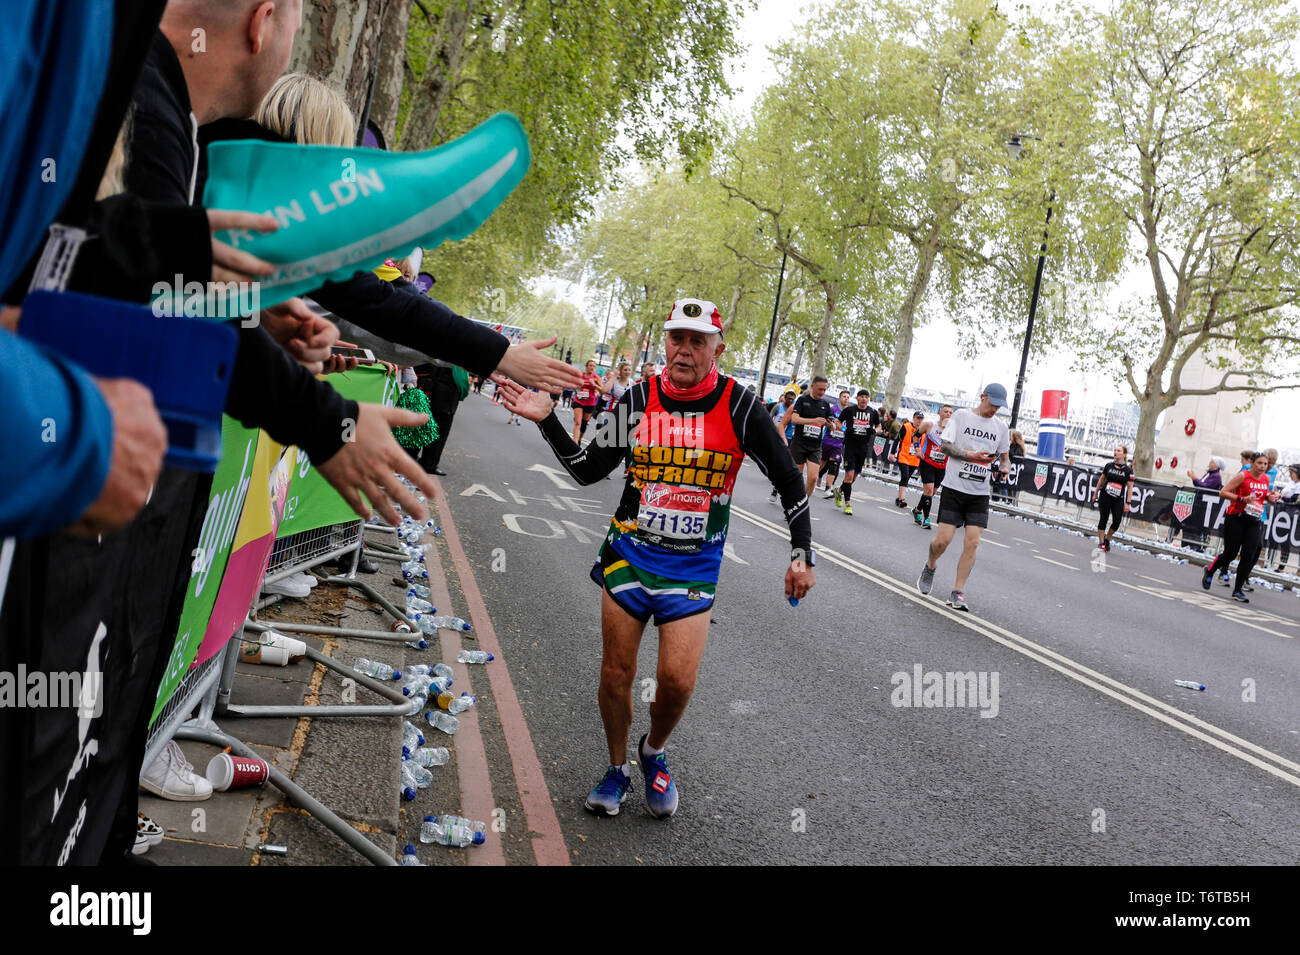 London, England – April 28, 2019: A man give high fives on his final mile of the Virgin Money London Marathon. Stock Photo